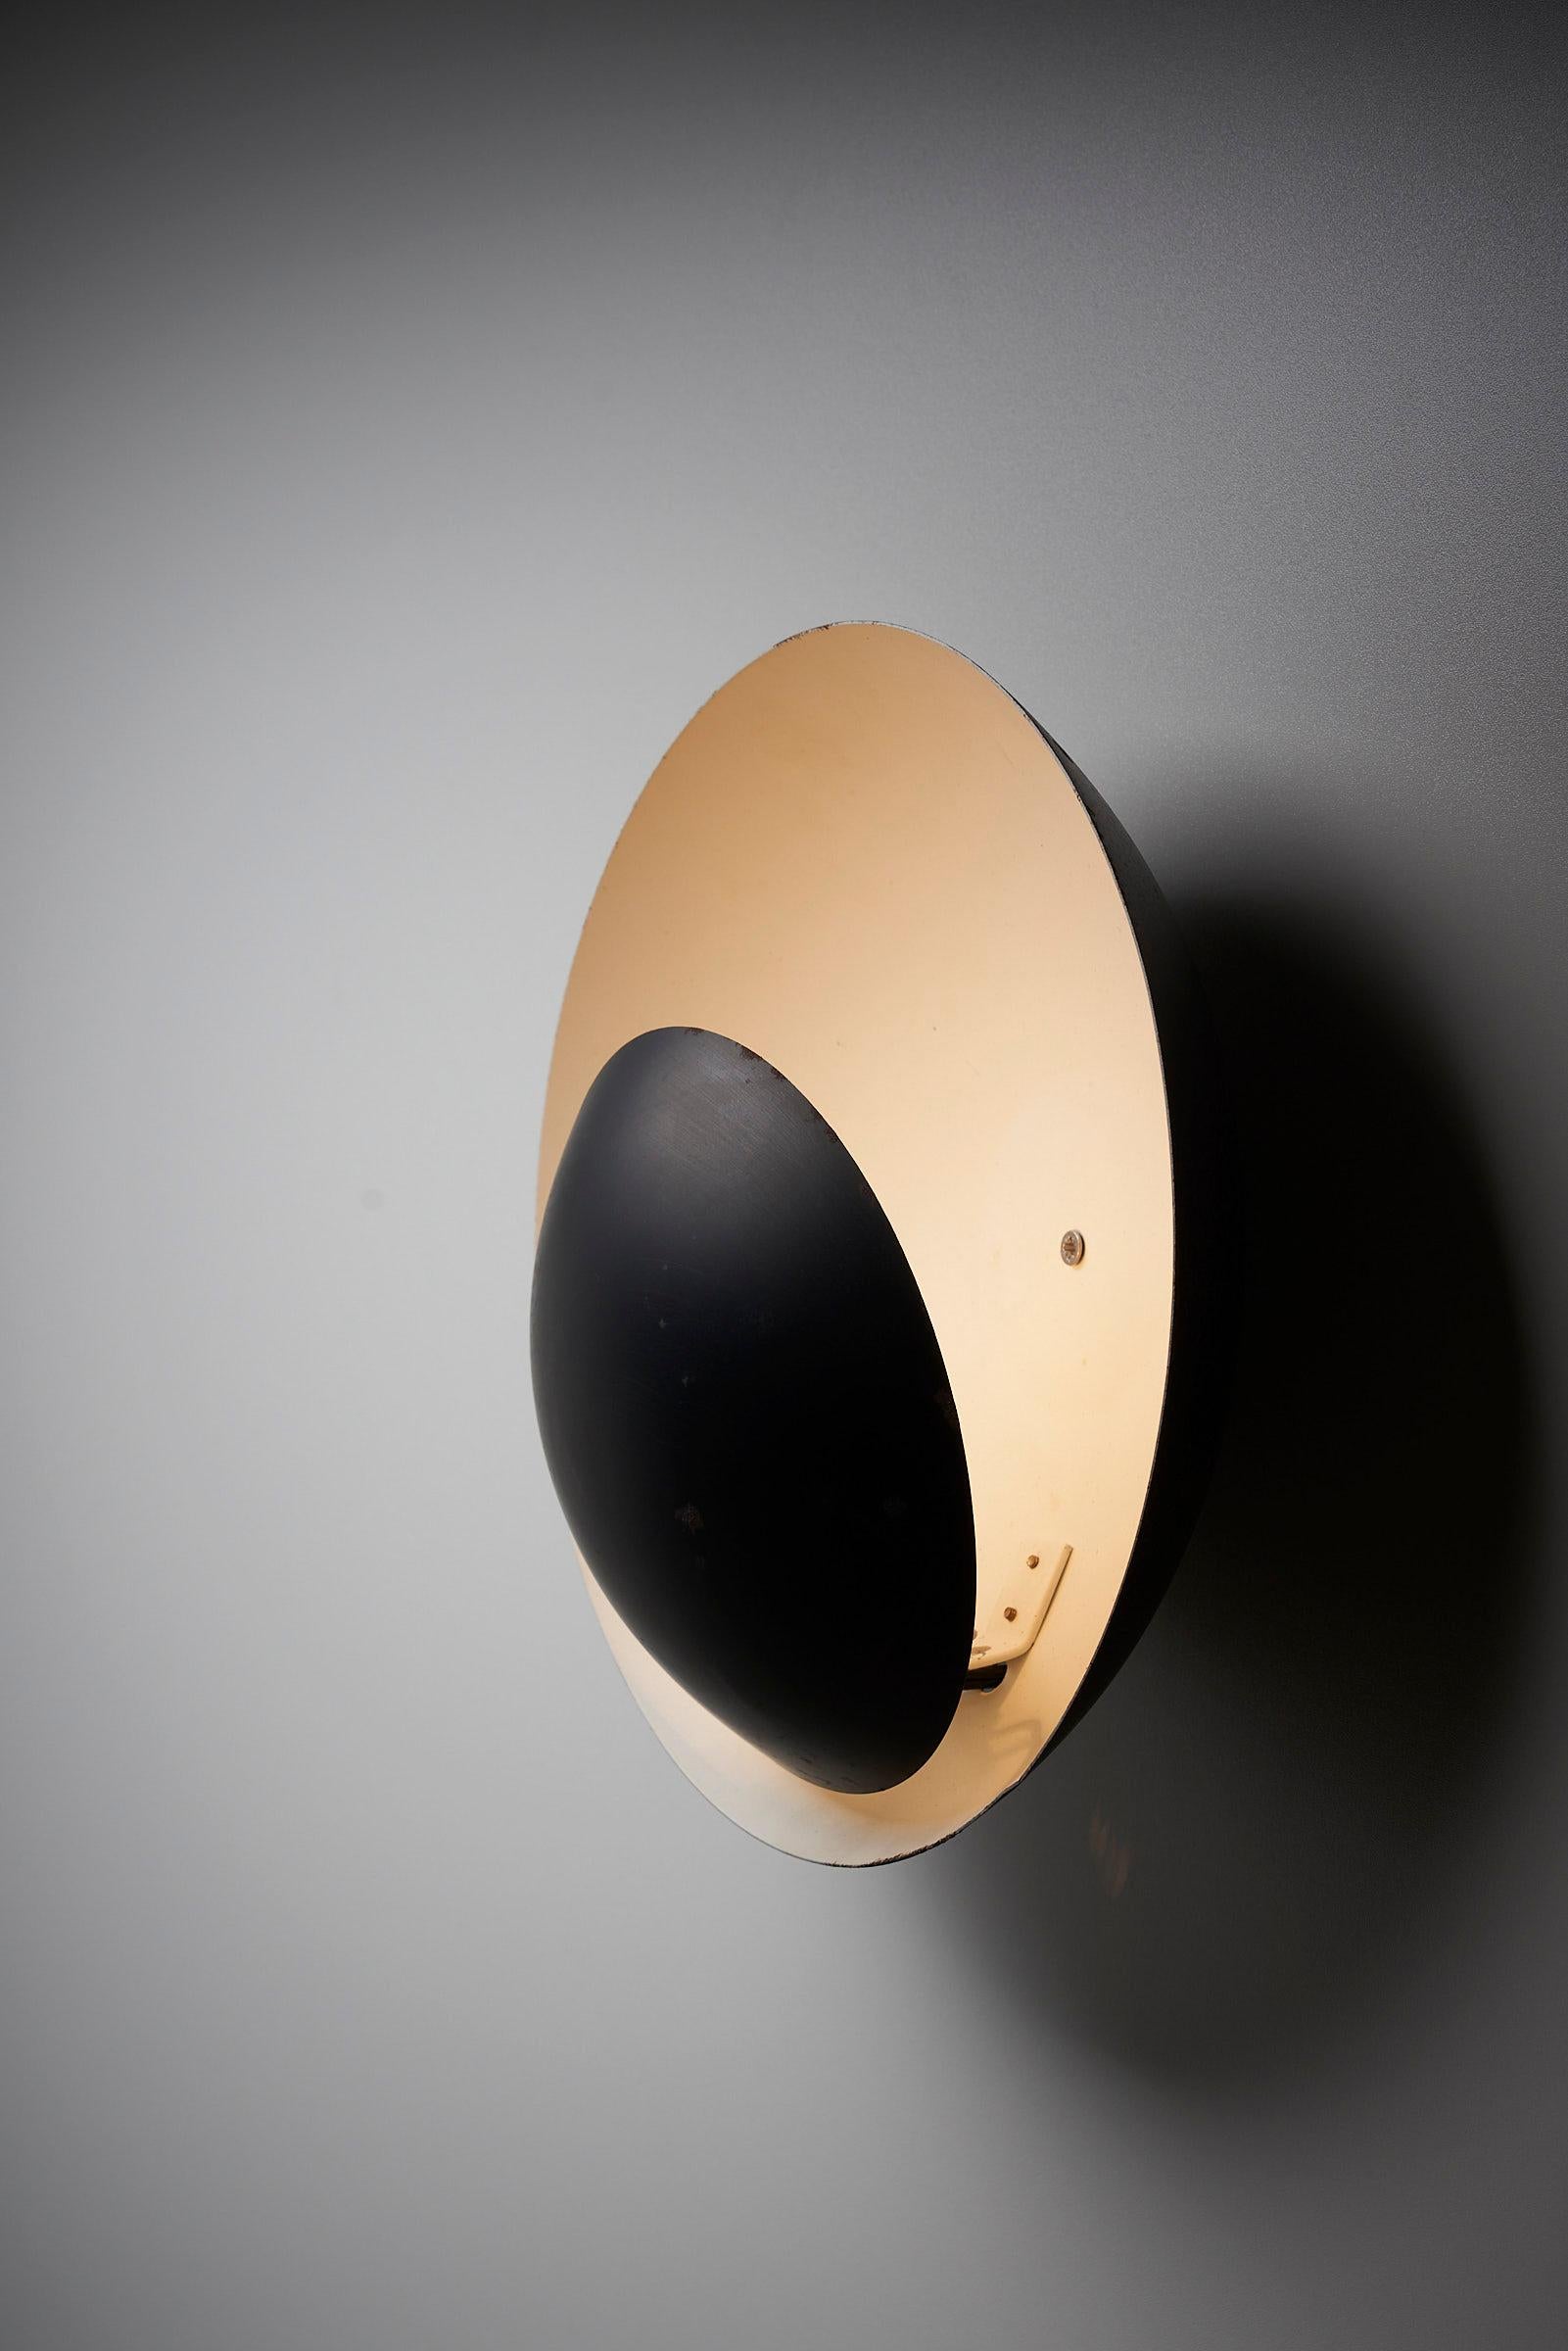 Introduce a visually striking and thoughtfully designed lighting piece to your space with the Wall Lamp by BuR Leuchten. This wall lamp features a captivating composition created by two half-spheres, resulting in a truly stunning aesthetic.

The